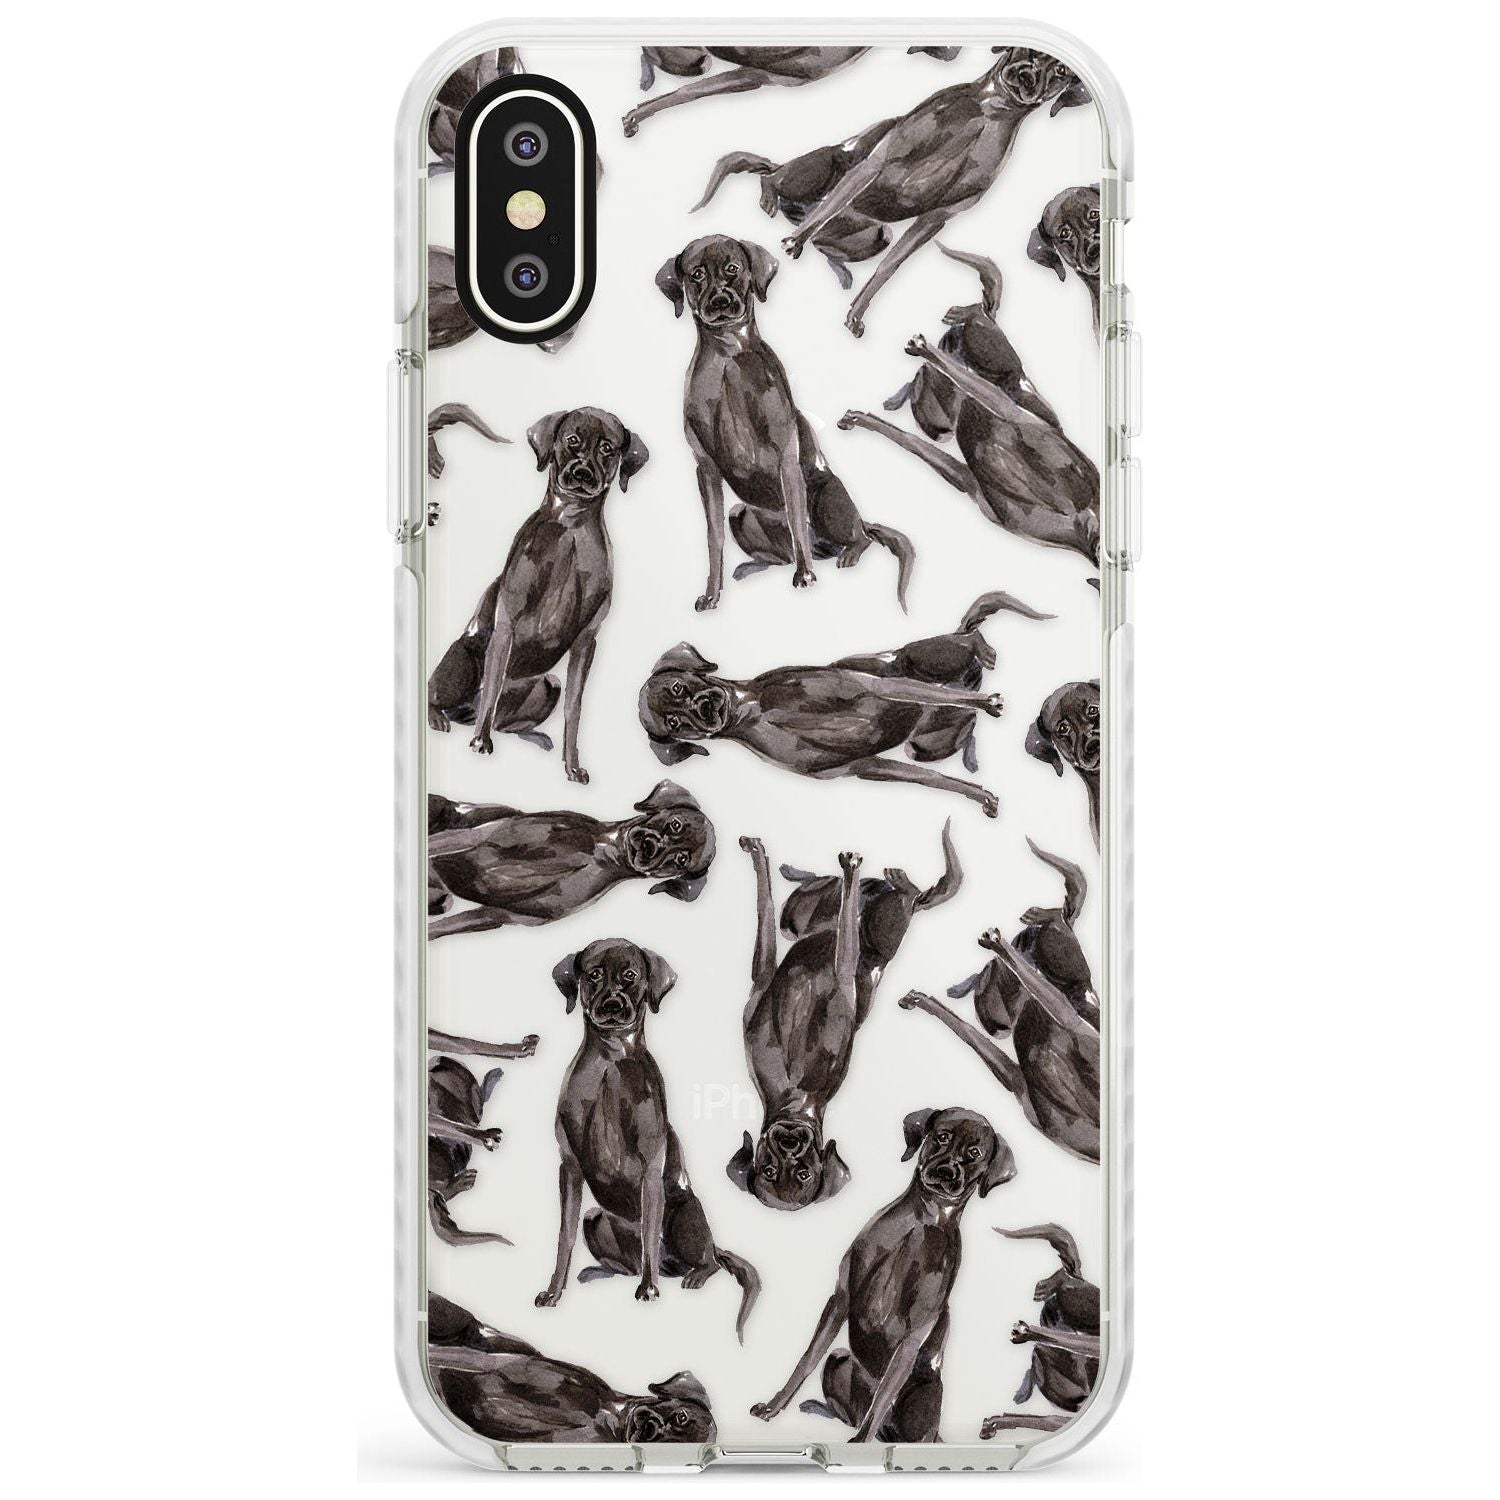 Black Labrador Watercolour Dog Pattern Impact Phone Case for iPhone X XS Max XR